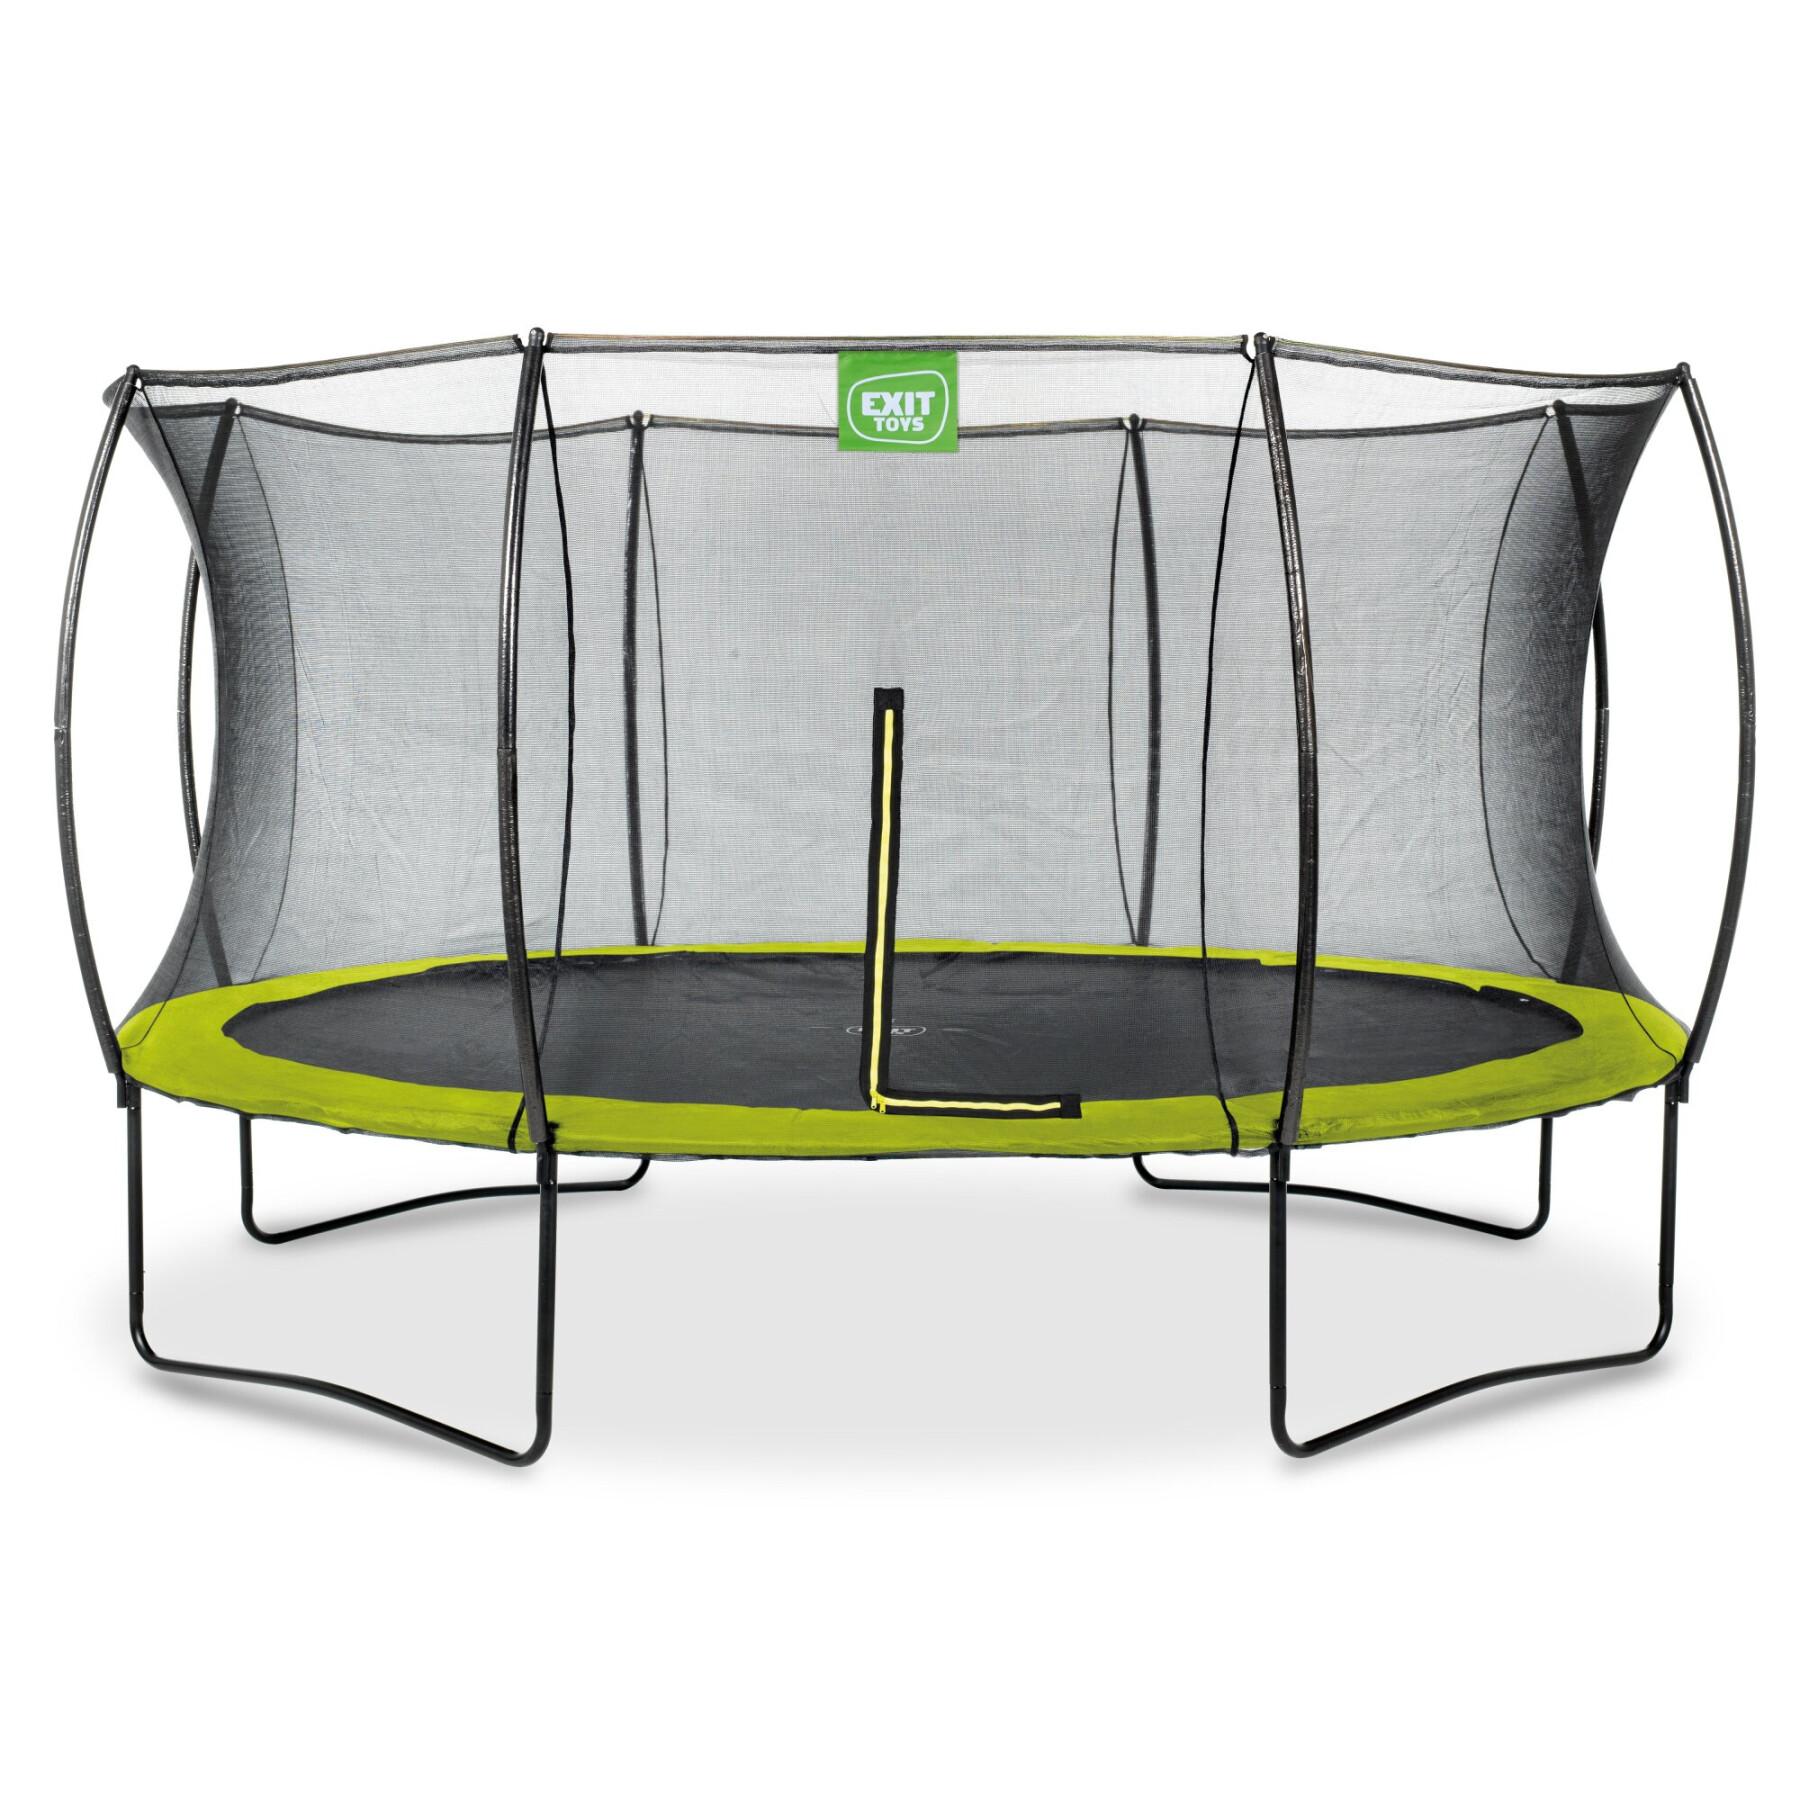 Trampolin Exit Toys Silhouette 427 cm